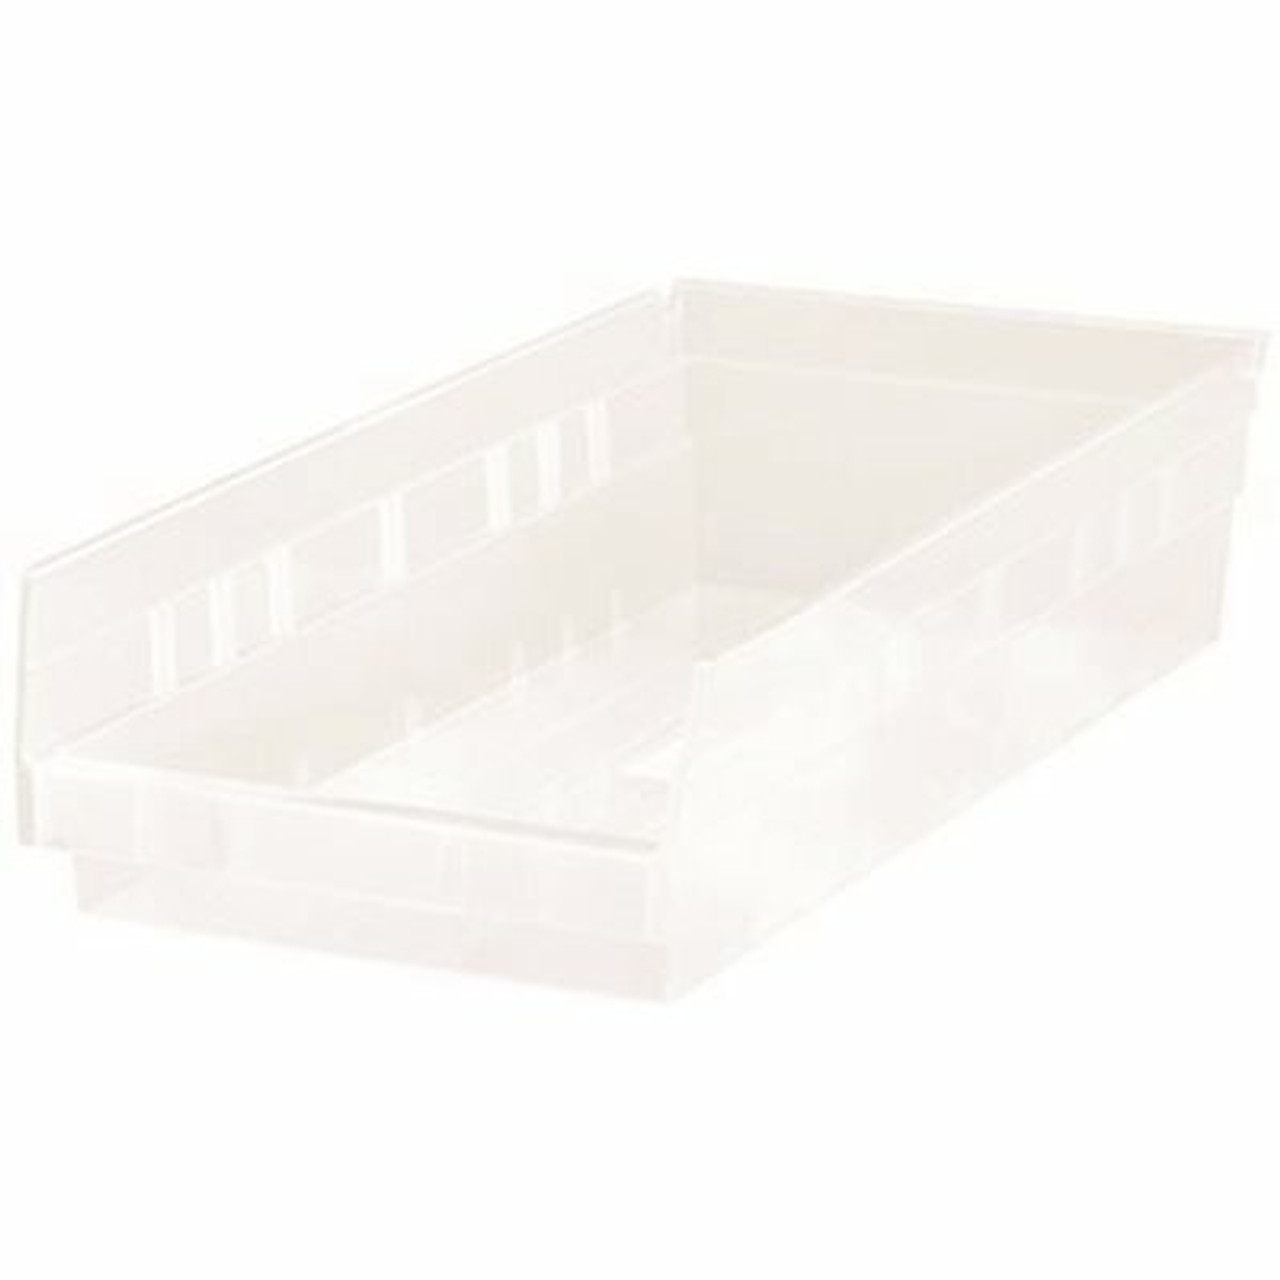 Quantum Storage Systems Qsb104Cl 6-5/8 In. Economy Shelf Bin, 17-7/8 In. X 4 In., Clear (20-Pack)